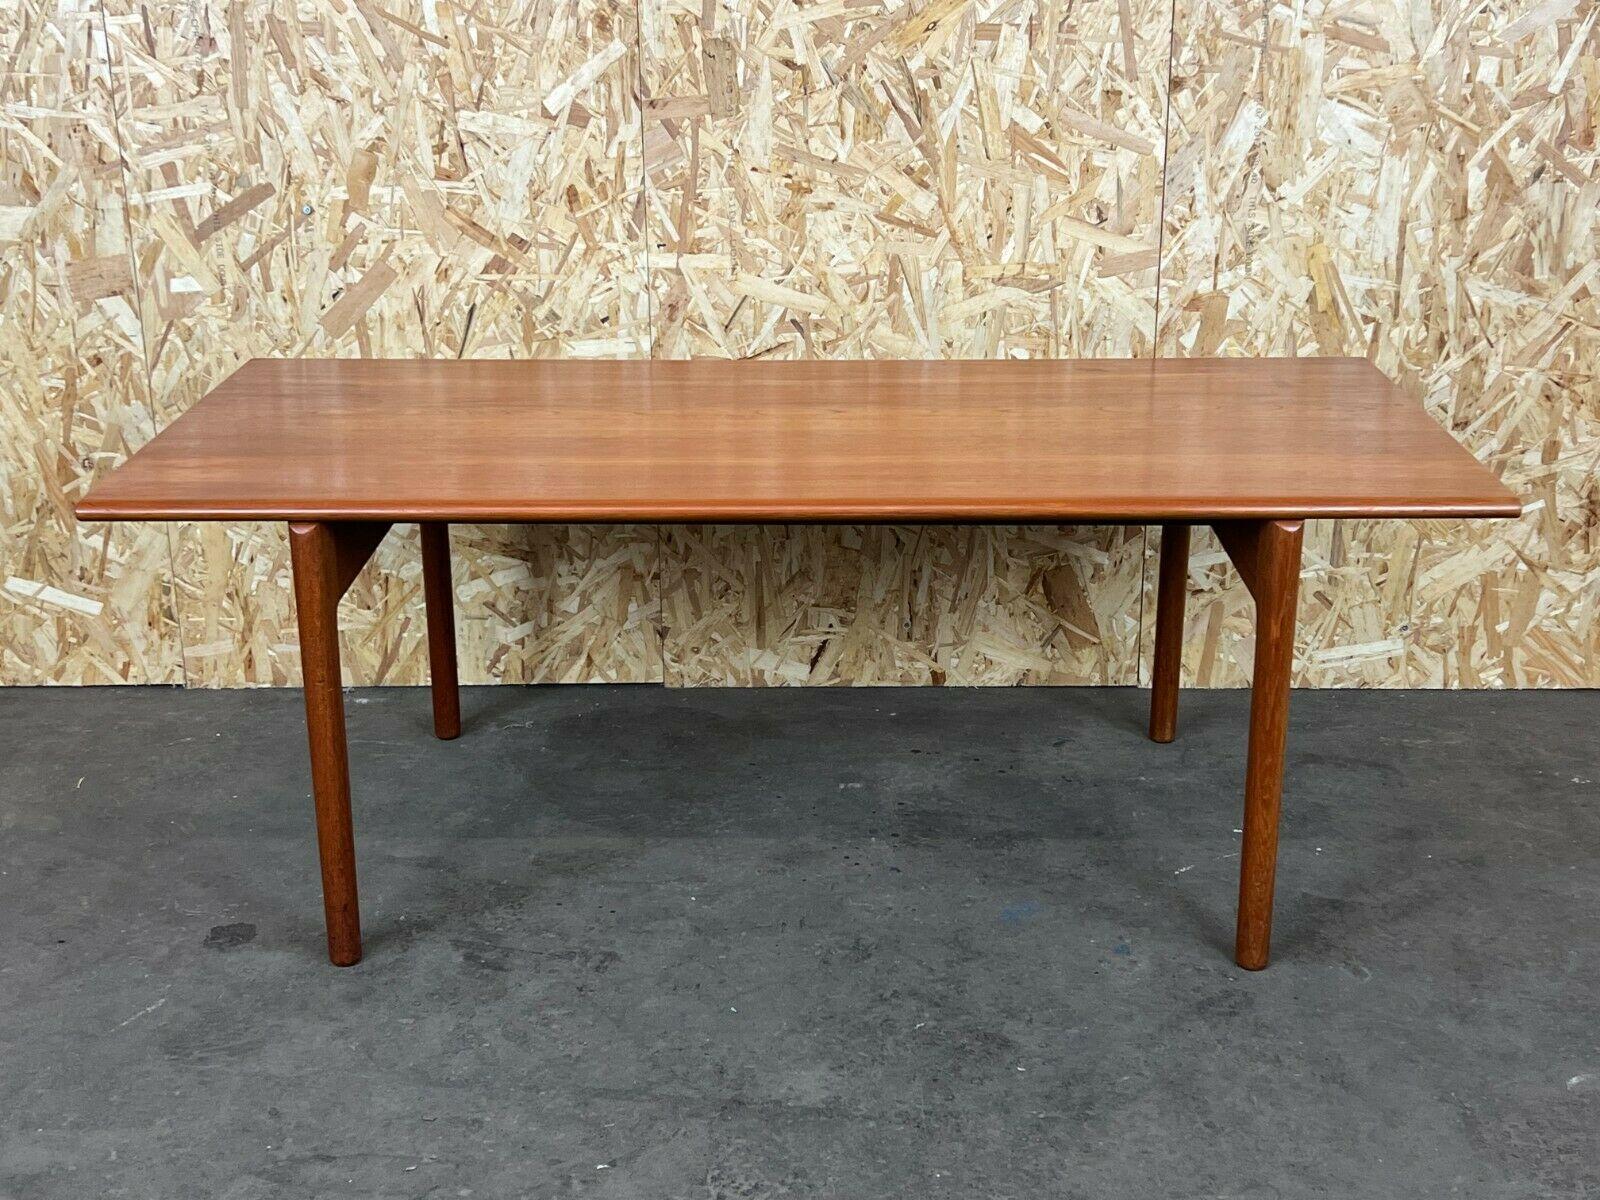 60s 70s teak table coffee table coffee table Hans J. Wegner Andreas Tuck

Object: coffee table

Manufacturer: Wegner / Tuck

Condition: good

Age: around 1960-1970

Dimensions:

130cm x 60cm x 48.5cm

Other notes:

The pictures serve